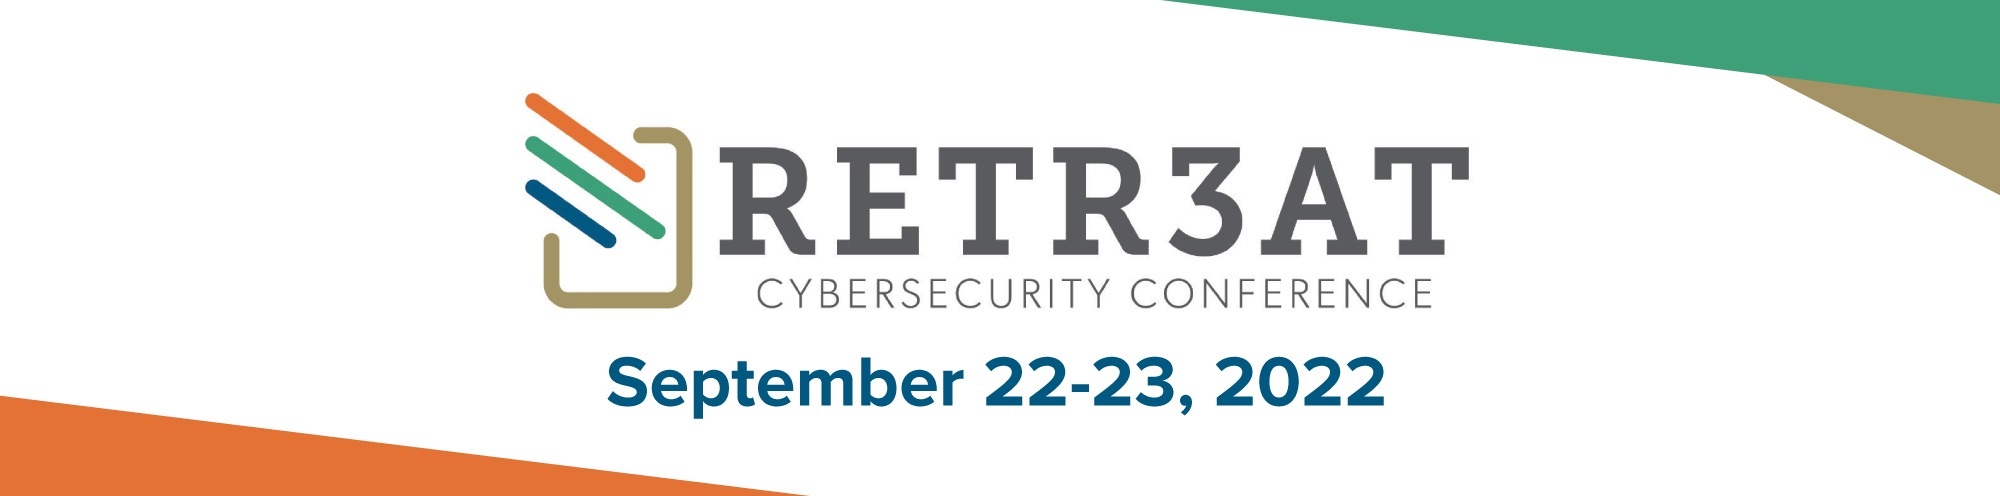 Header image for Retr3at cybersecurity conference